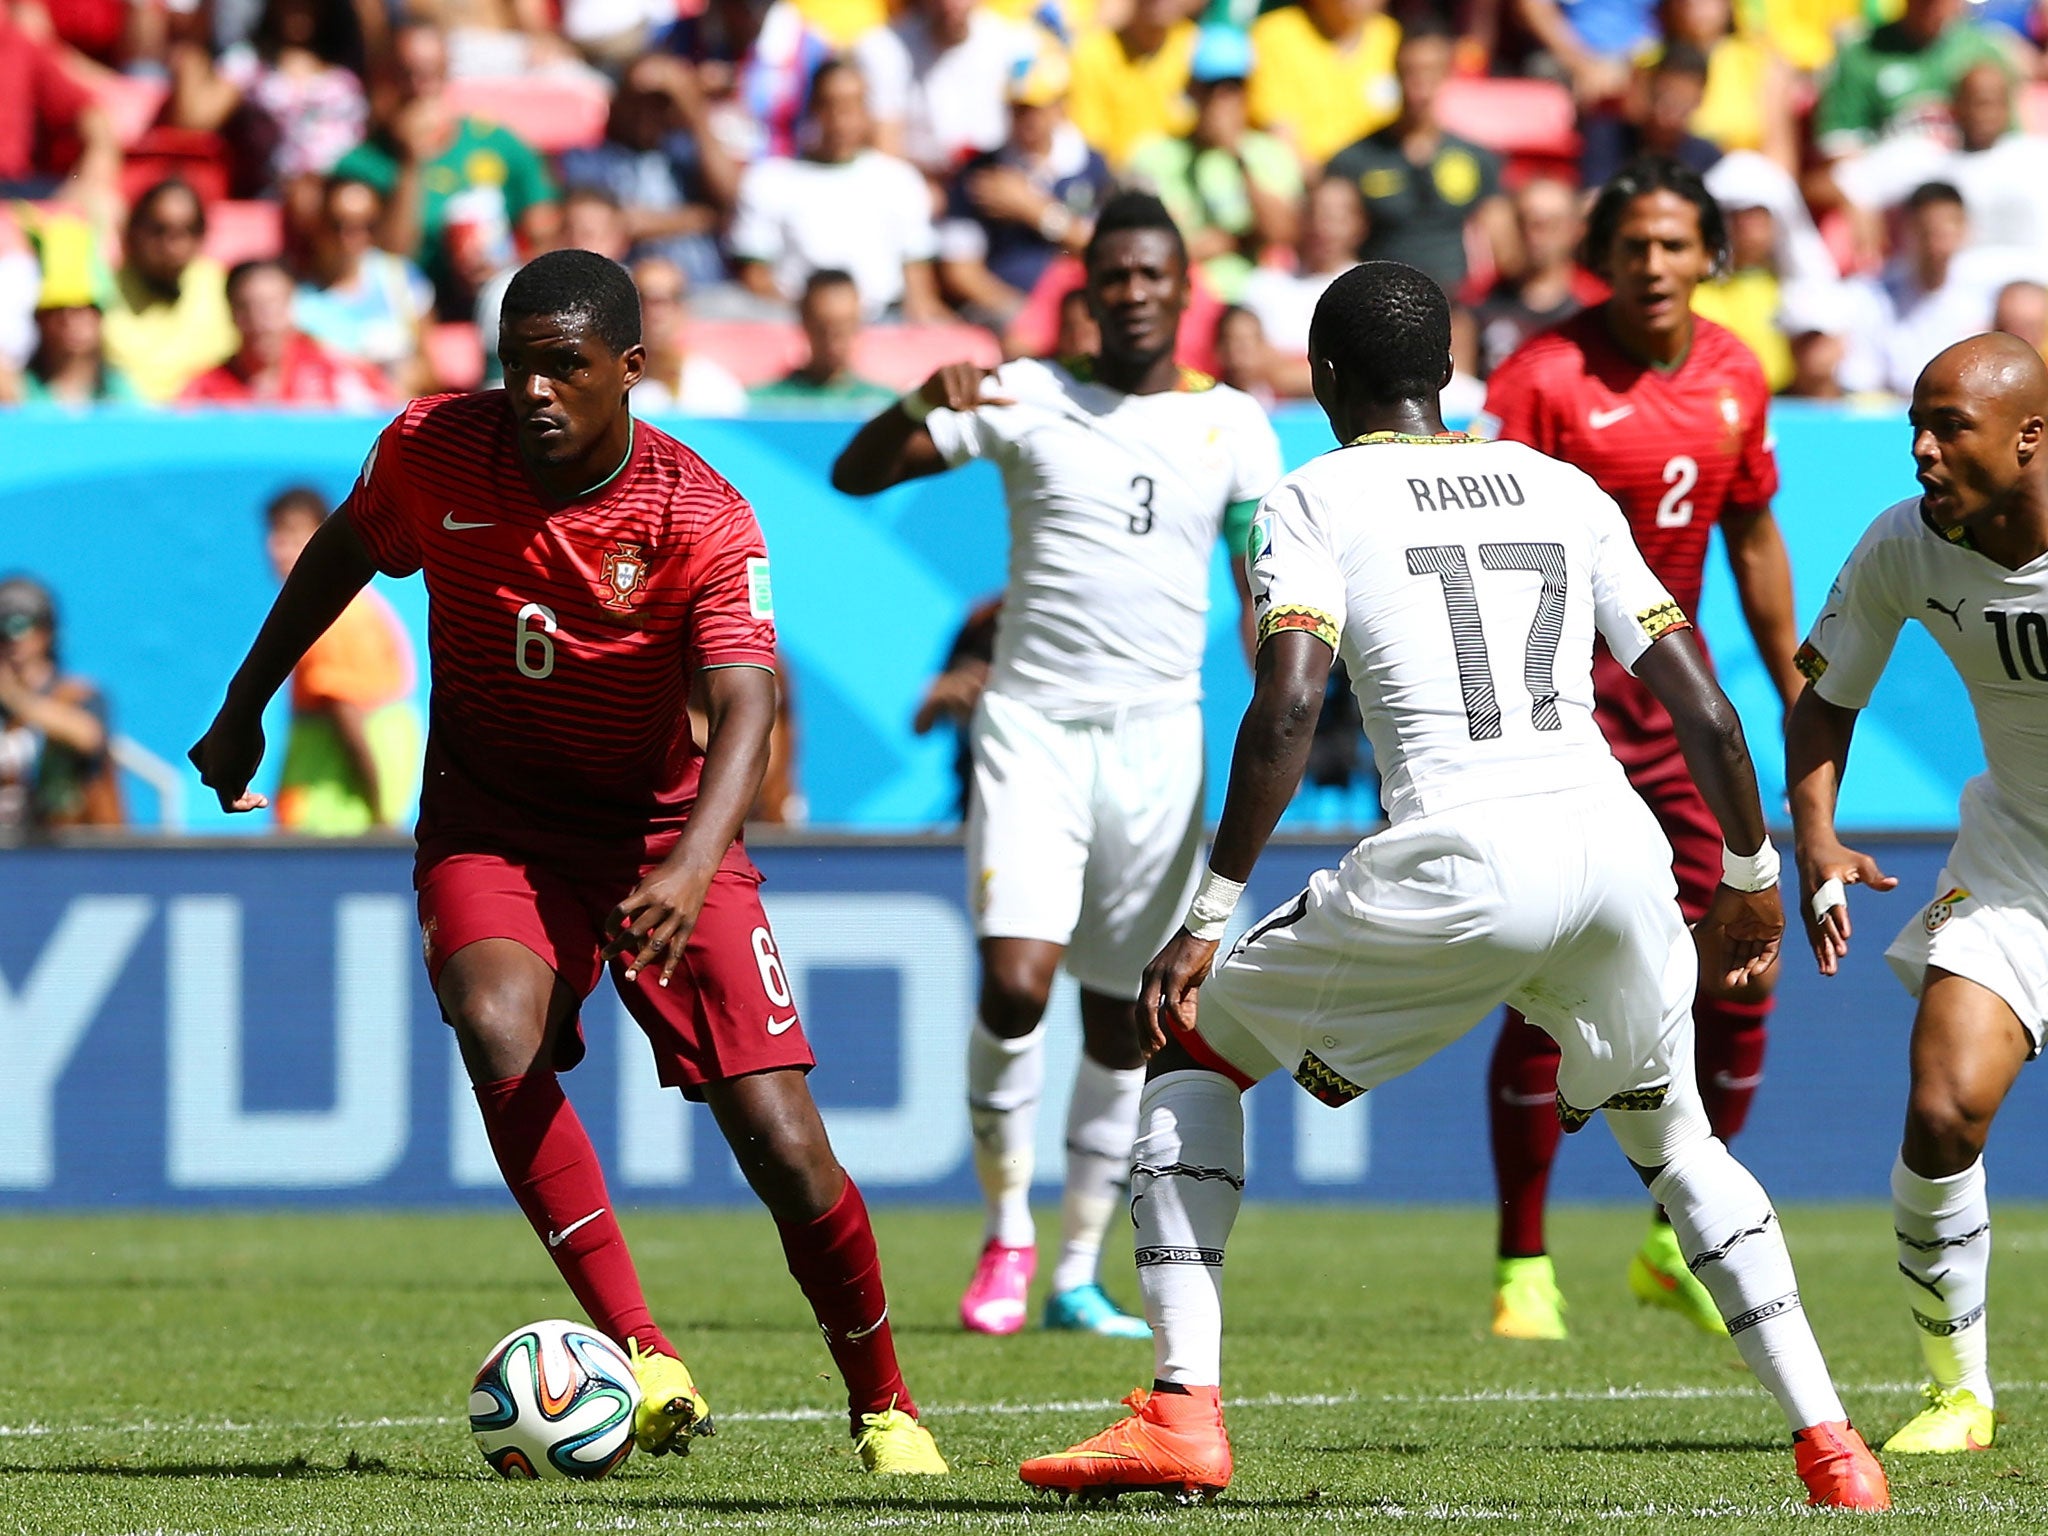 William Carvalho in action for Portugal